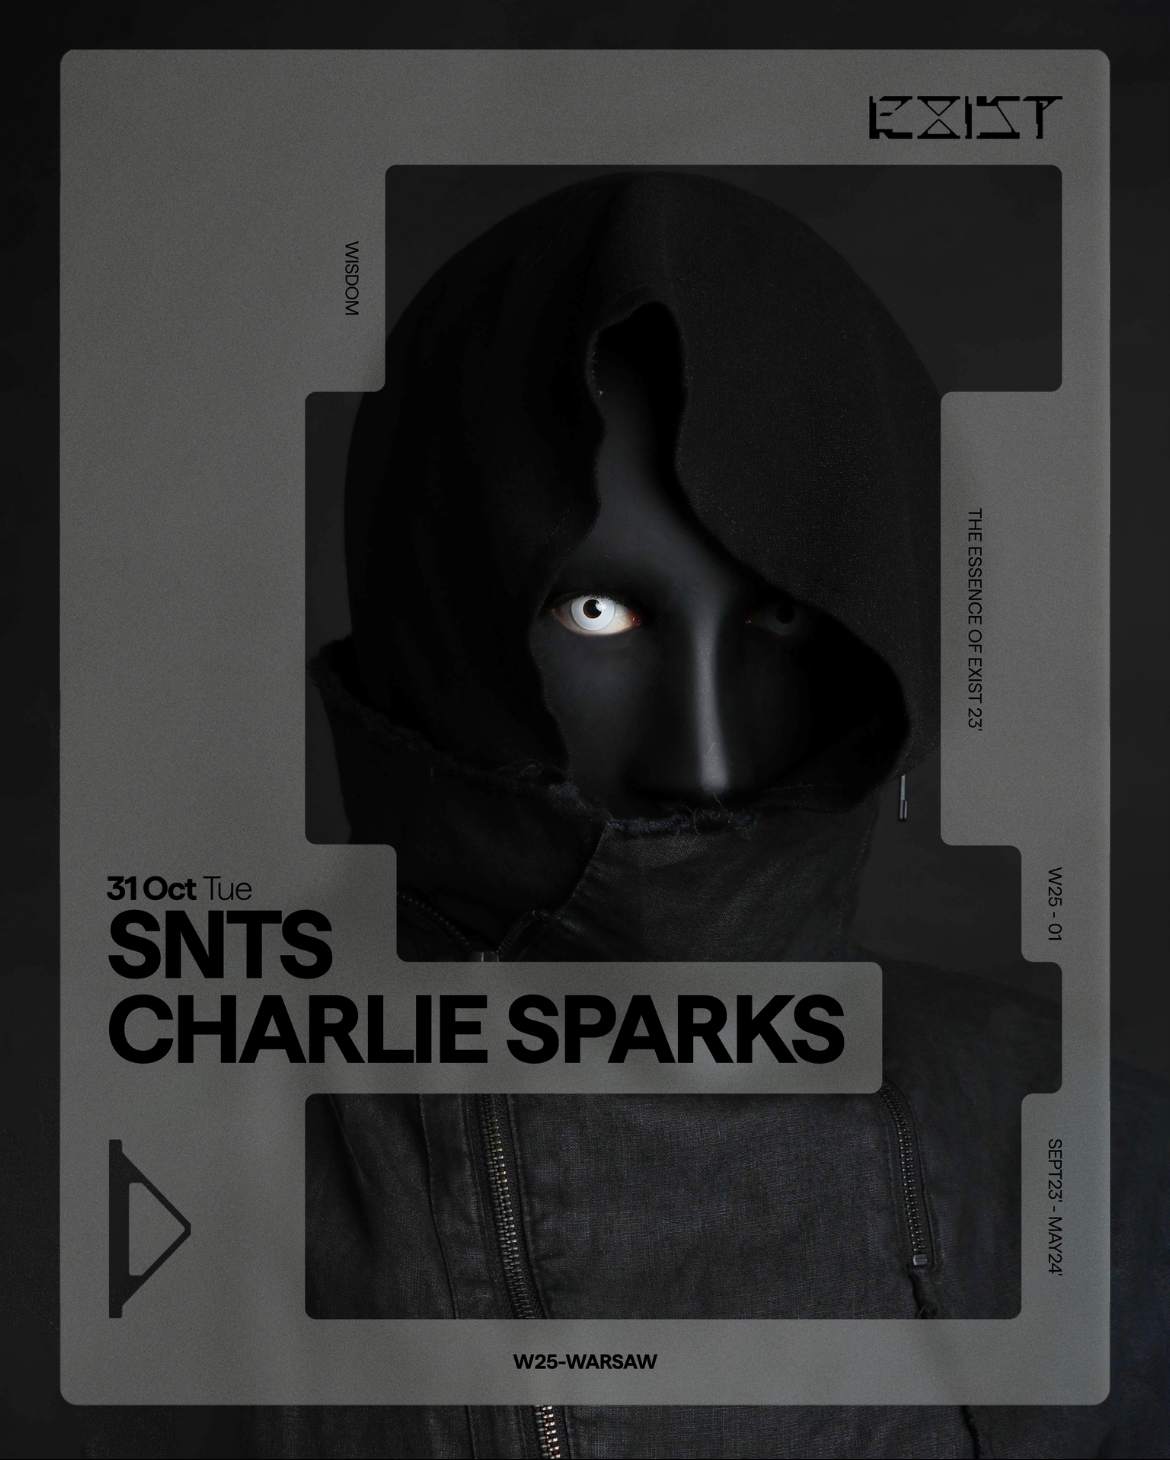 [CANCELLED] EXIST pres. SNTS & Charlie Sparks - フライヤー表